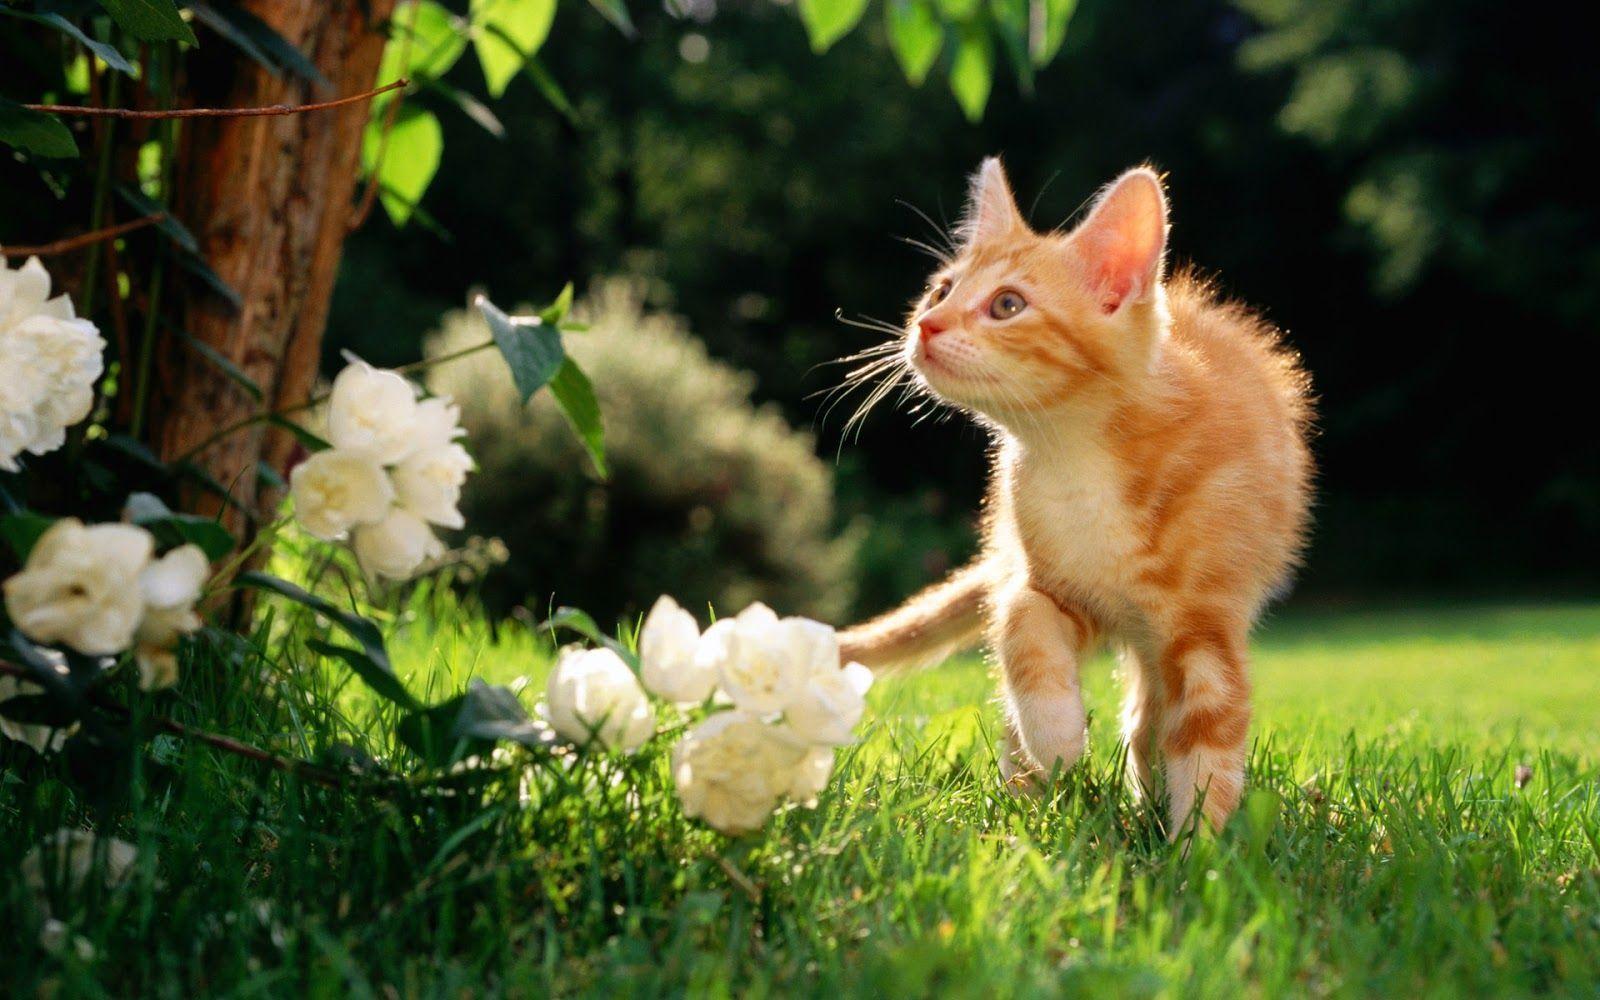 Picpile: Cute kitty cat kittens HD wallpaper. Indian bridal